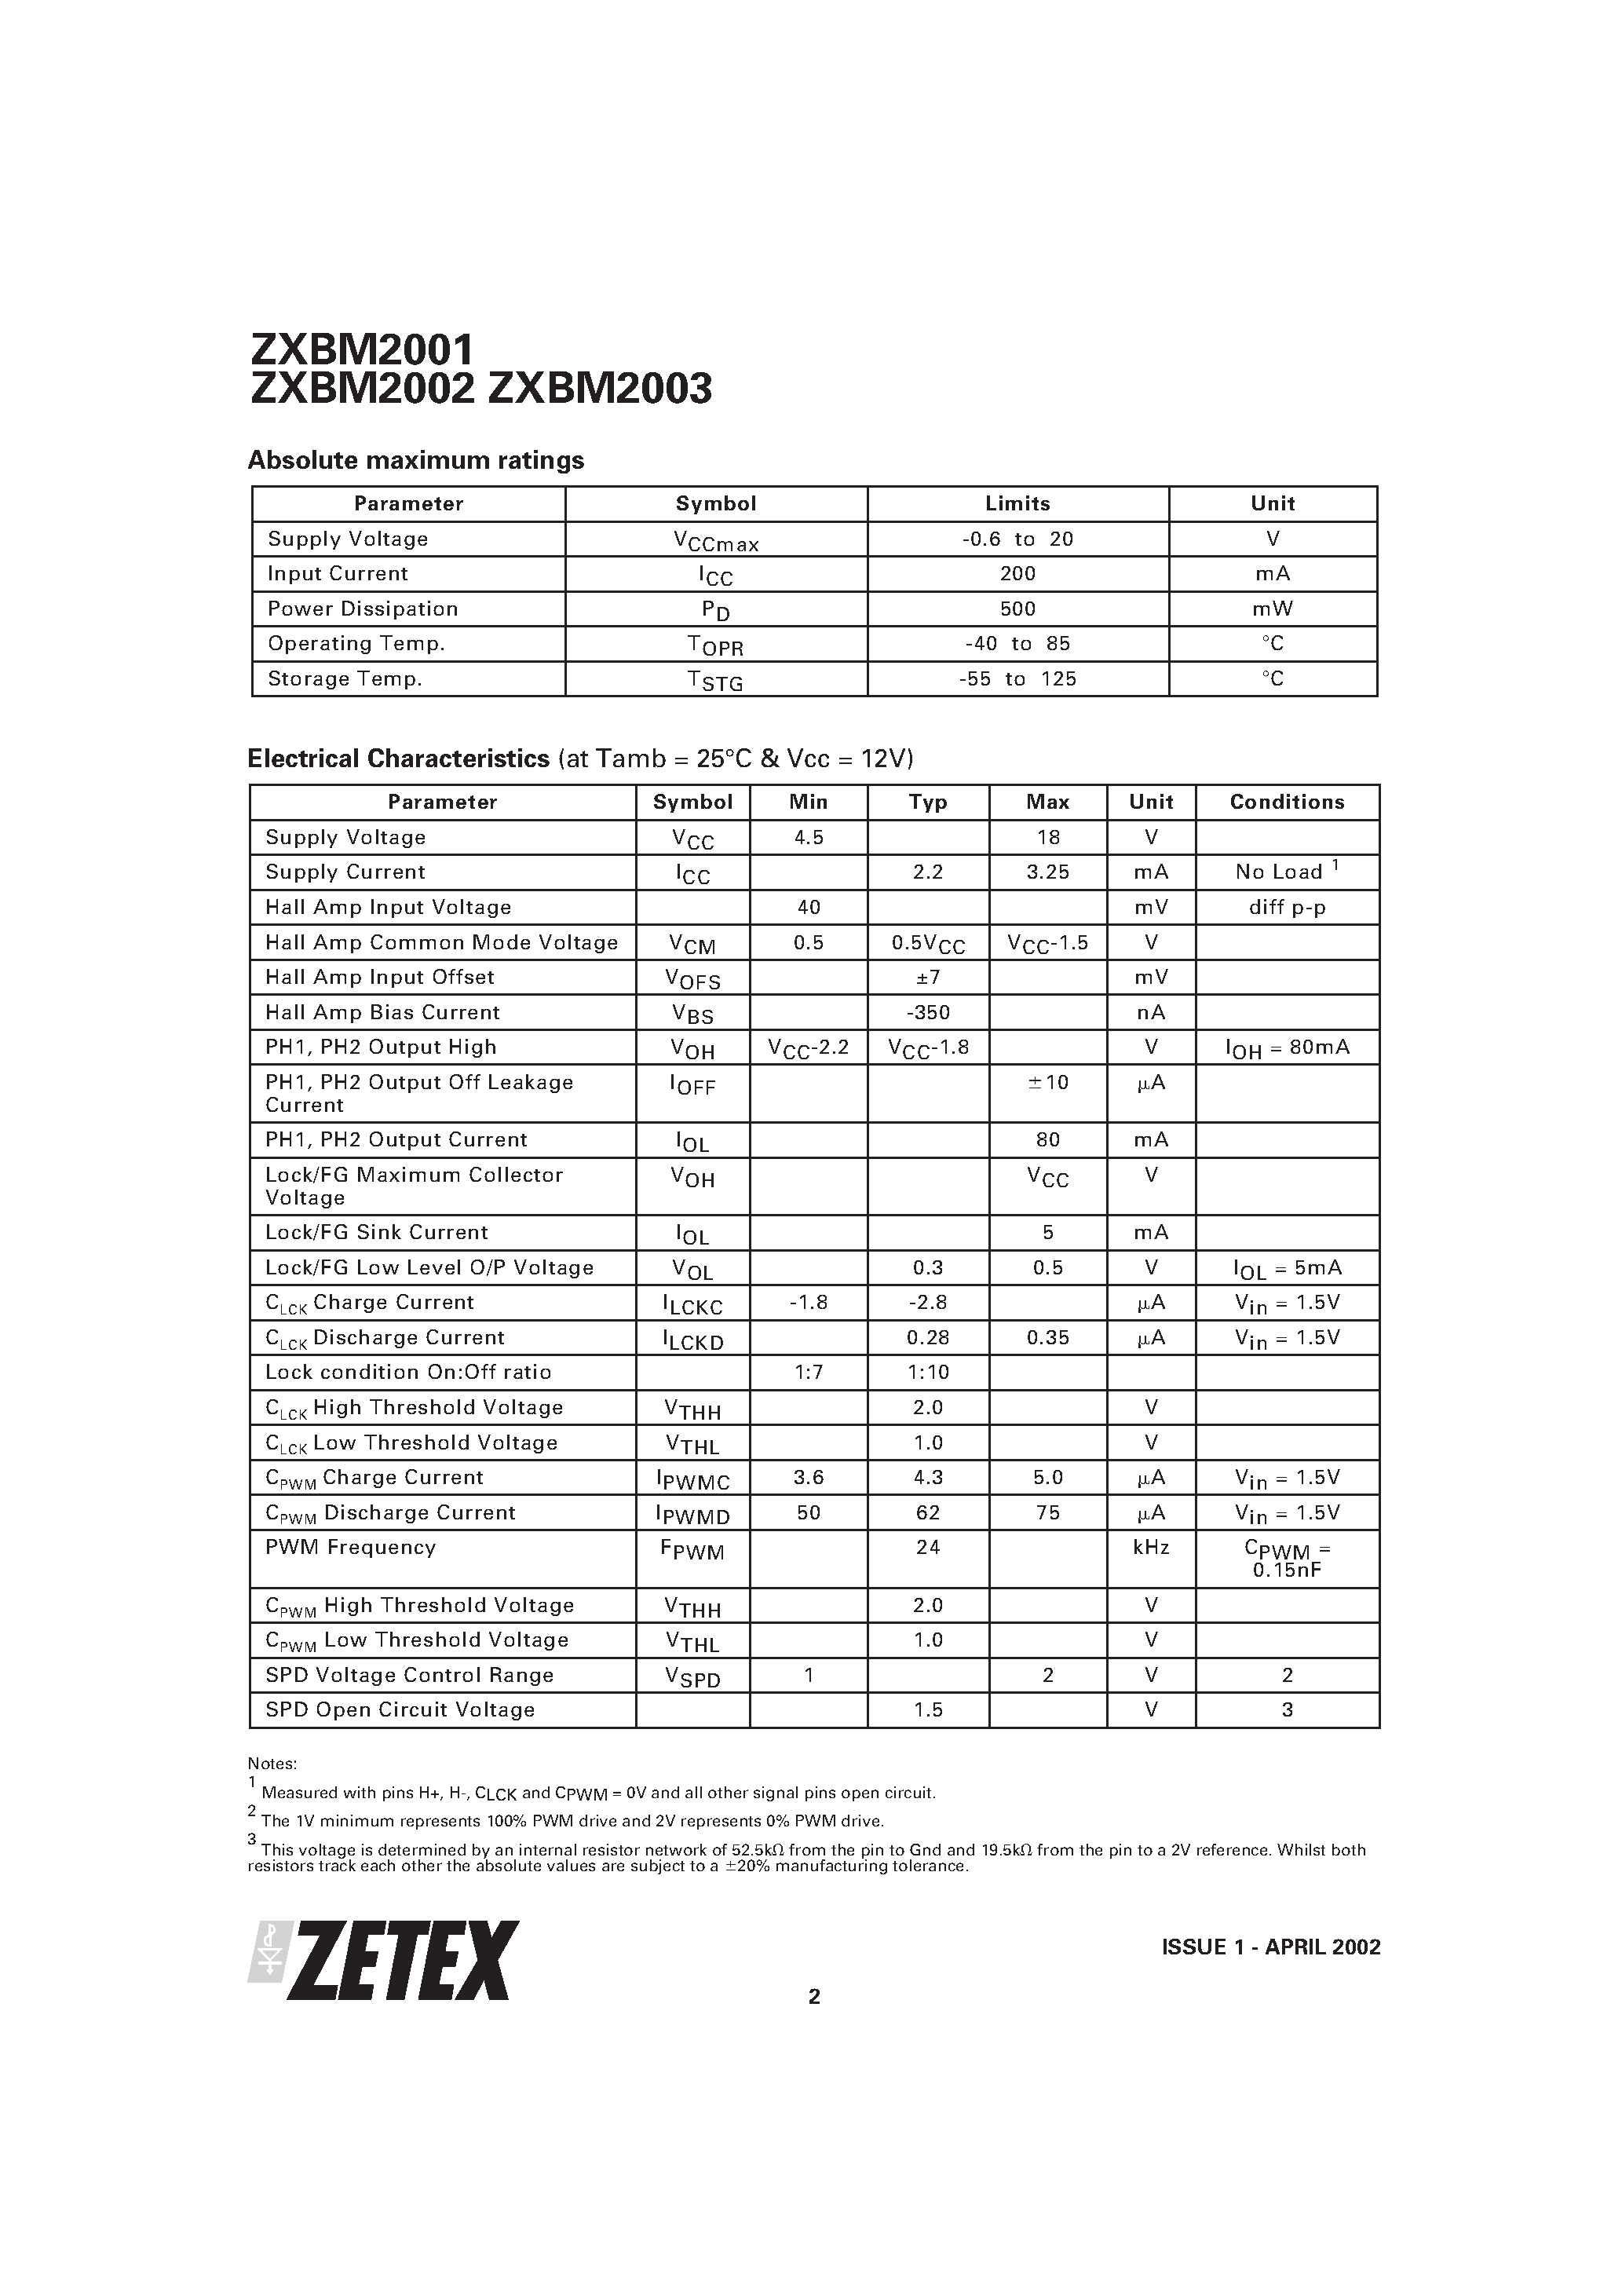 Datasheet ZXBM2002 - VARIABLE SPEED 2-PHASE FAN MOTOR CONTROLLER page 2